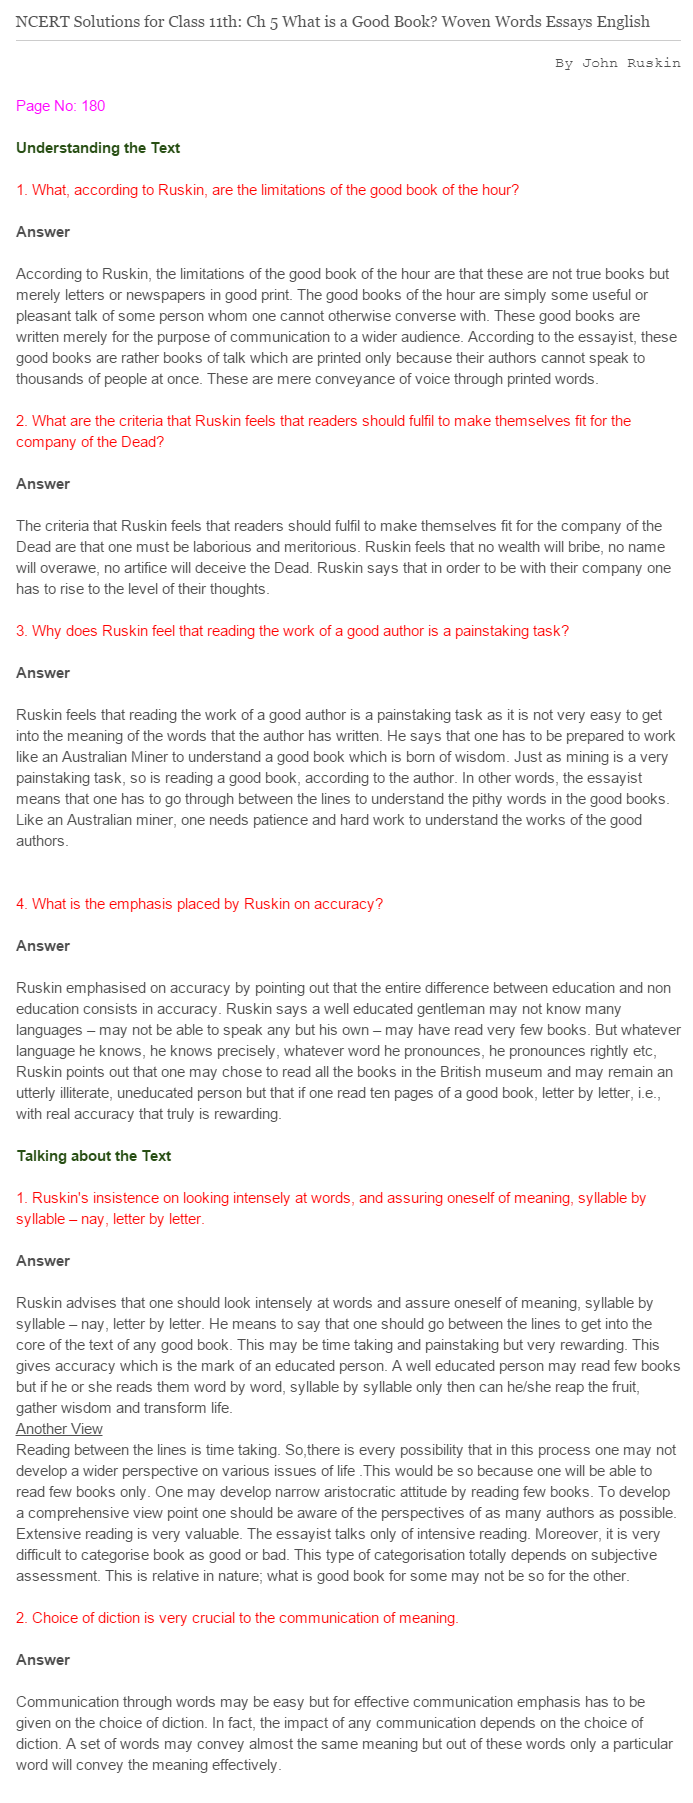 NCERT Solutions For Class 11 English Woven Words What is a Good Book